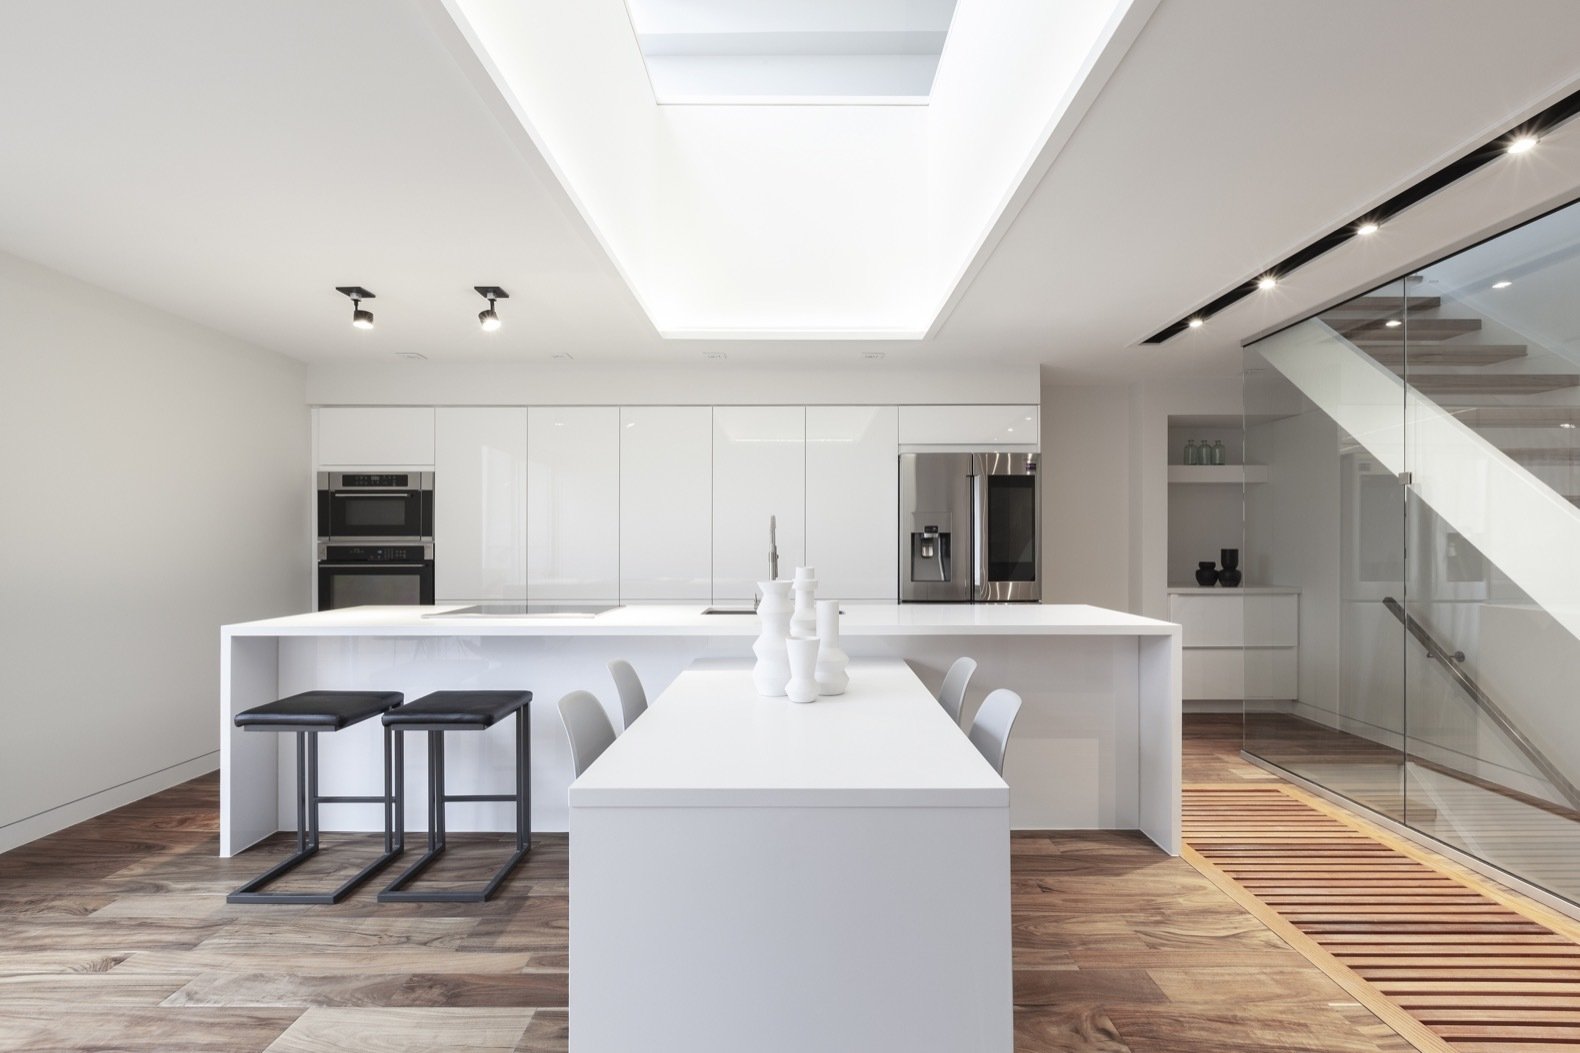 for-a-clean-and-bright-finish-the-light-filled-kitchen-is-fitted-with-white-quartz-countertops-and-high-gloss-white-ikea-cabinetry